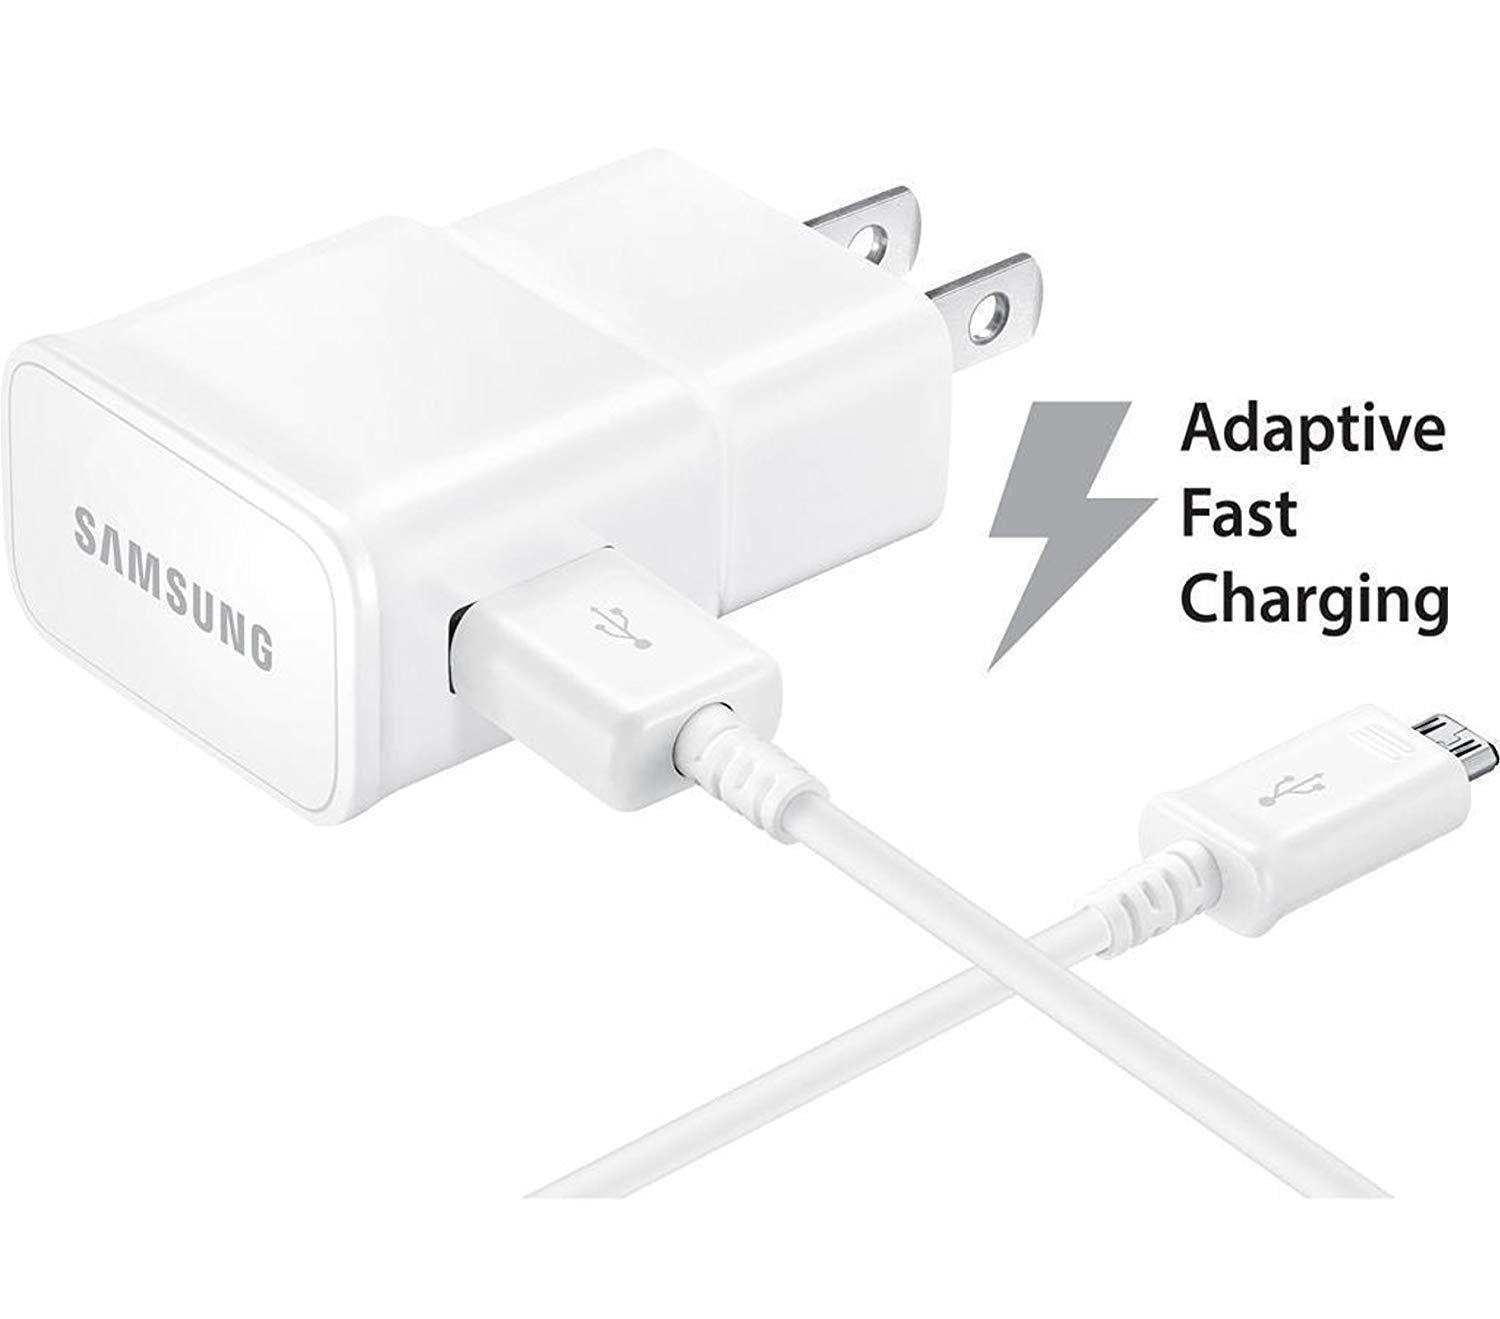 Adaptive Fast Charger Compatible with Motorola Moto X Play [Wall Charger + 5 Feet USB Cable] WHITE - New